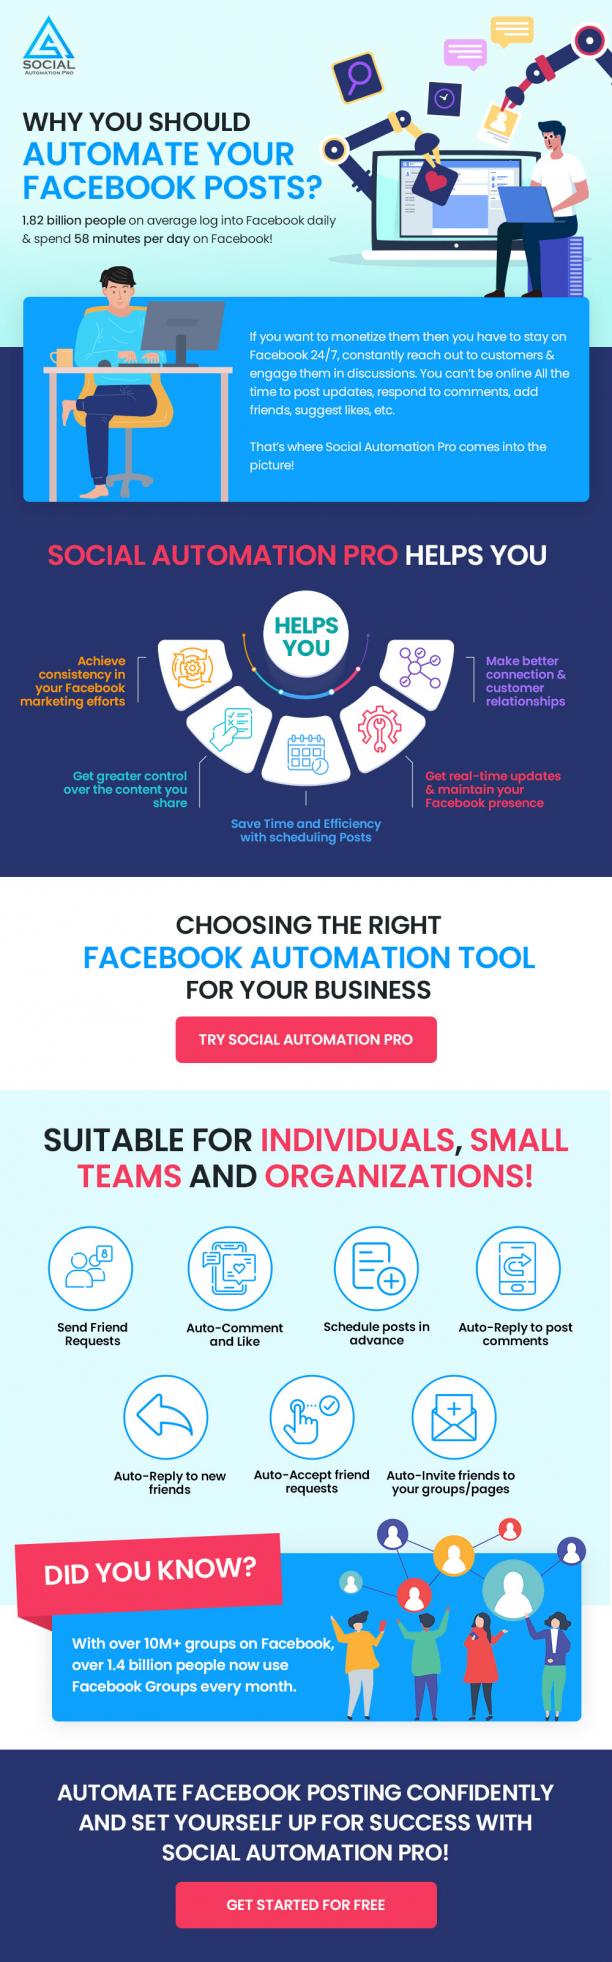 Why You Should Automate Your Facebook Posts?